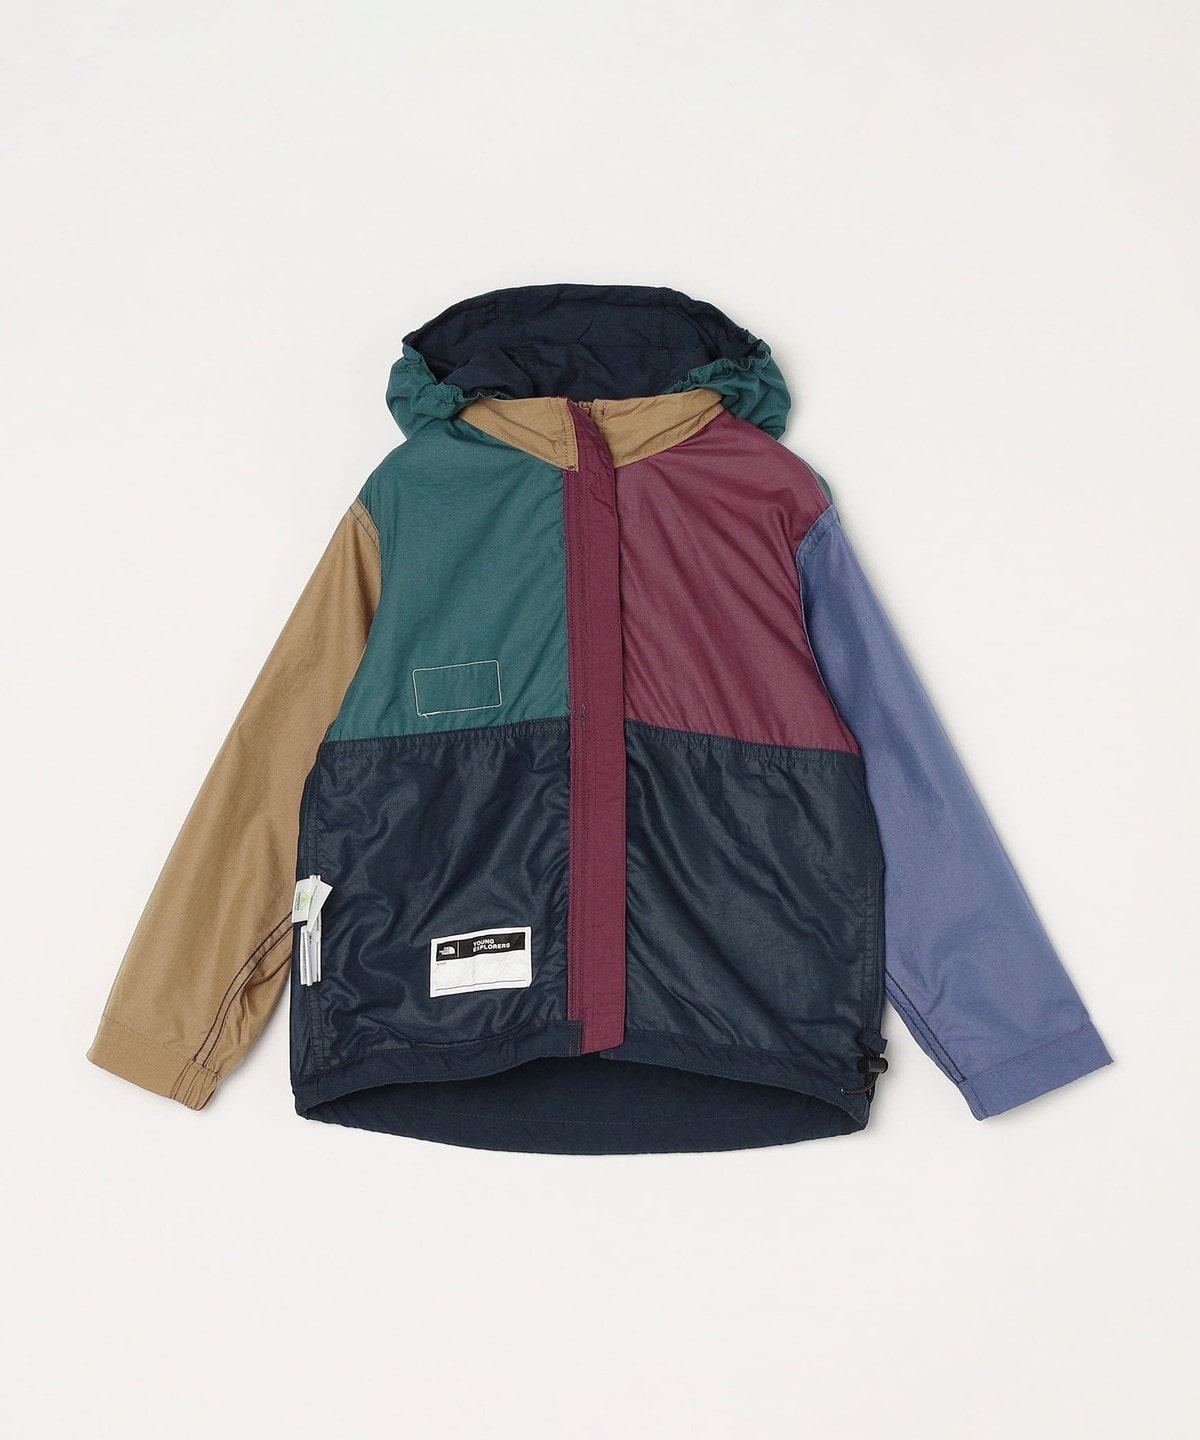 THE NORTH FACE: 〈撥水加工〉グランド コンパクトジャケット 23AW ...